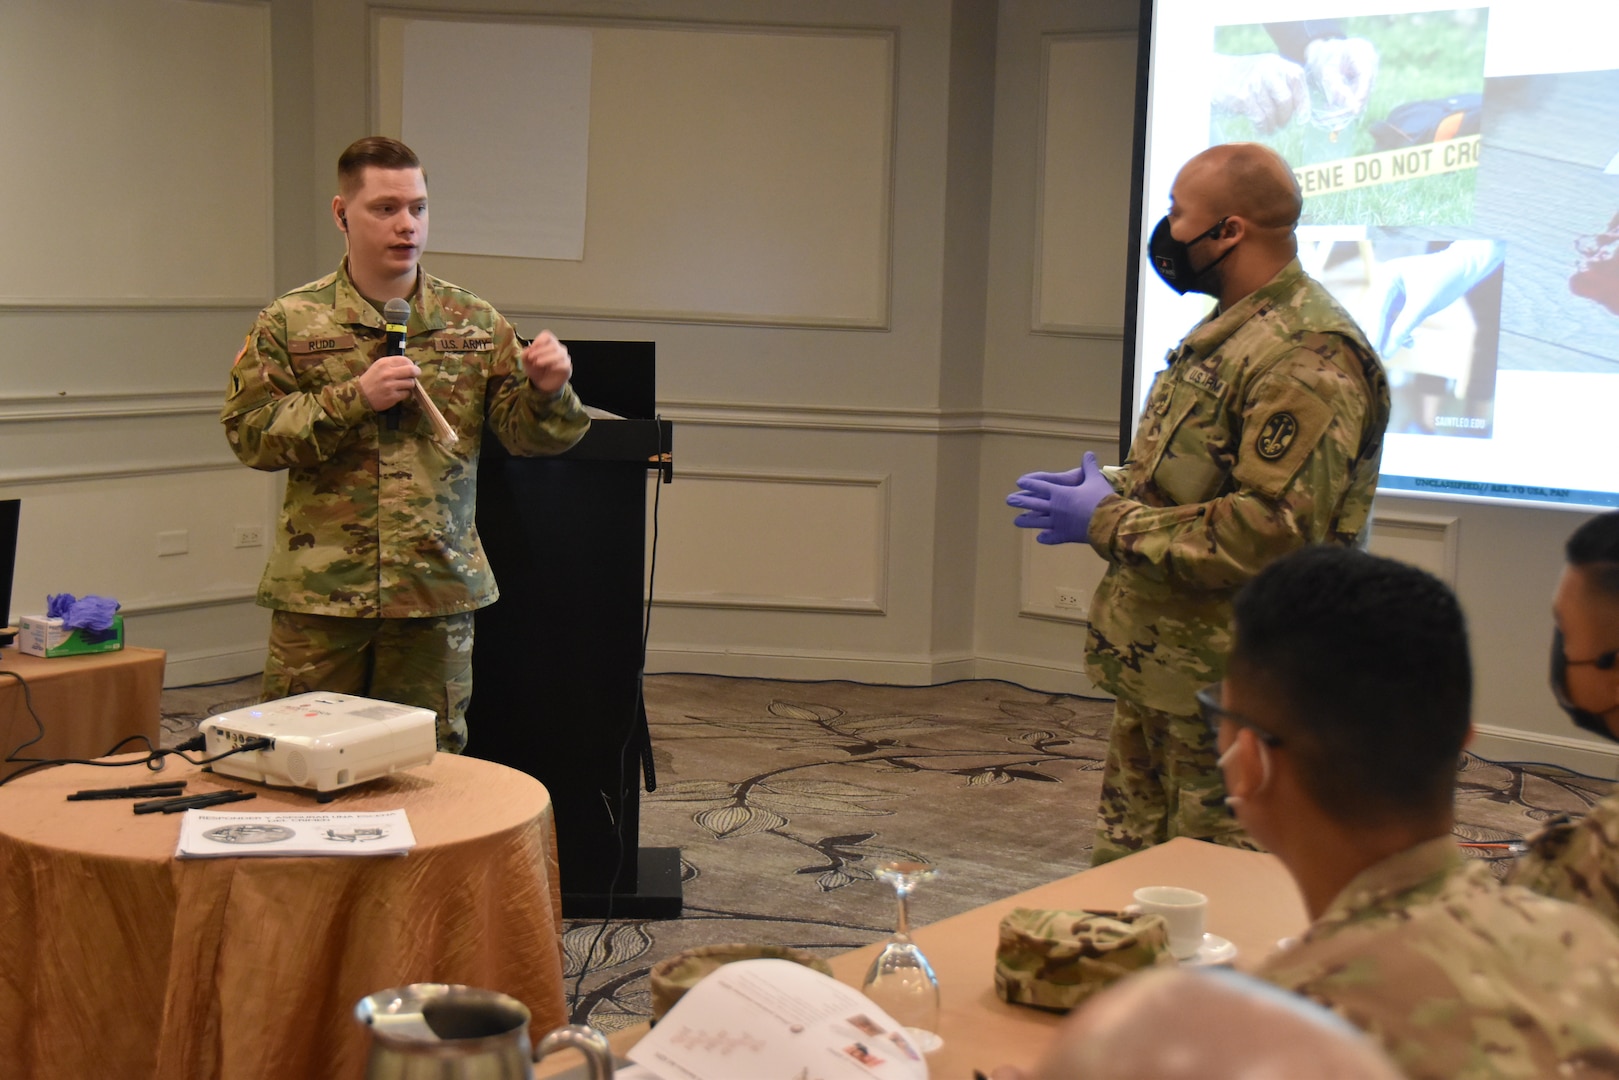 Staff Sgt. William Rudd, 1175th Military Police Co., facilitates a presentation on taking DNA evidence with Staff Sgt. Jaymes Dooley (1139th MP Co.), serving as a demonstrator. The presentation was part of a crime scene investigation subject matter expert exchange between Missouri National Guard Soldiers and members of Panama's law enforcement and protection agencies. The Missouri National Guard has partnered with the country of Panama since 1996 under the Department of Defense National Guard Bureau State Partnership Program.